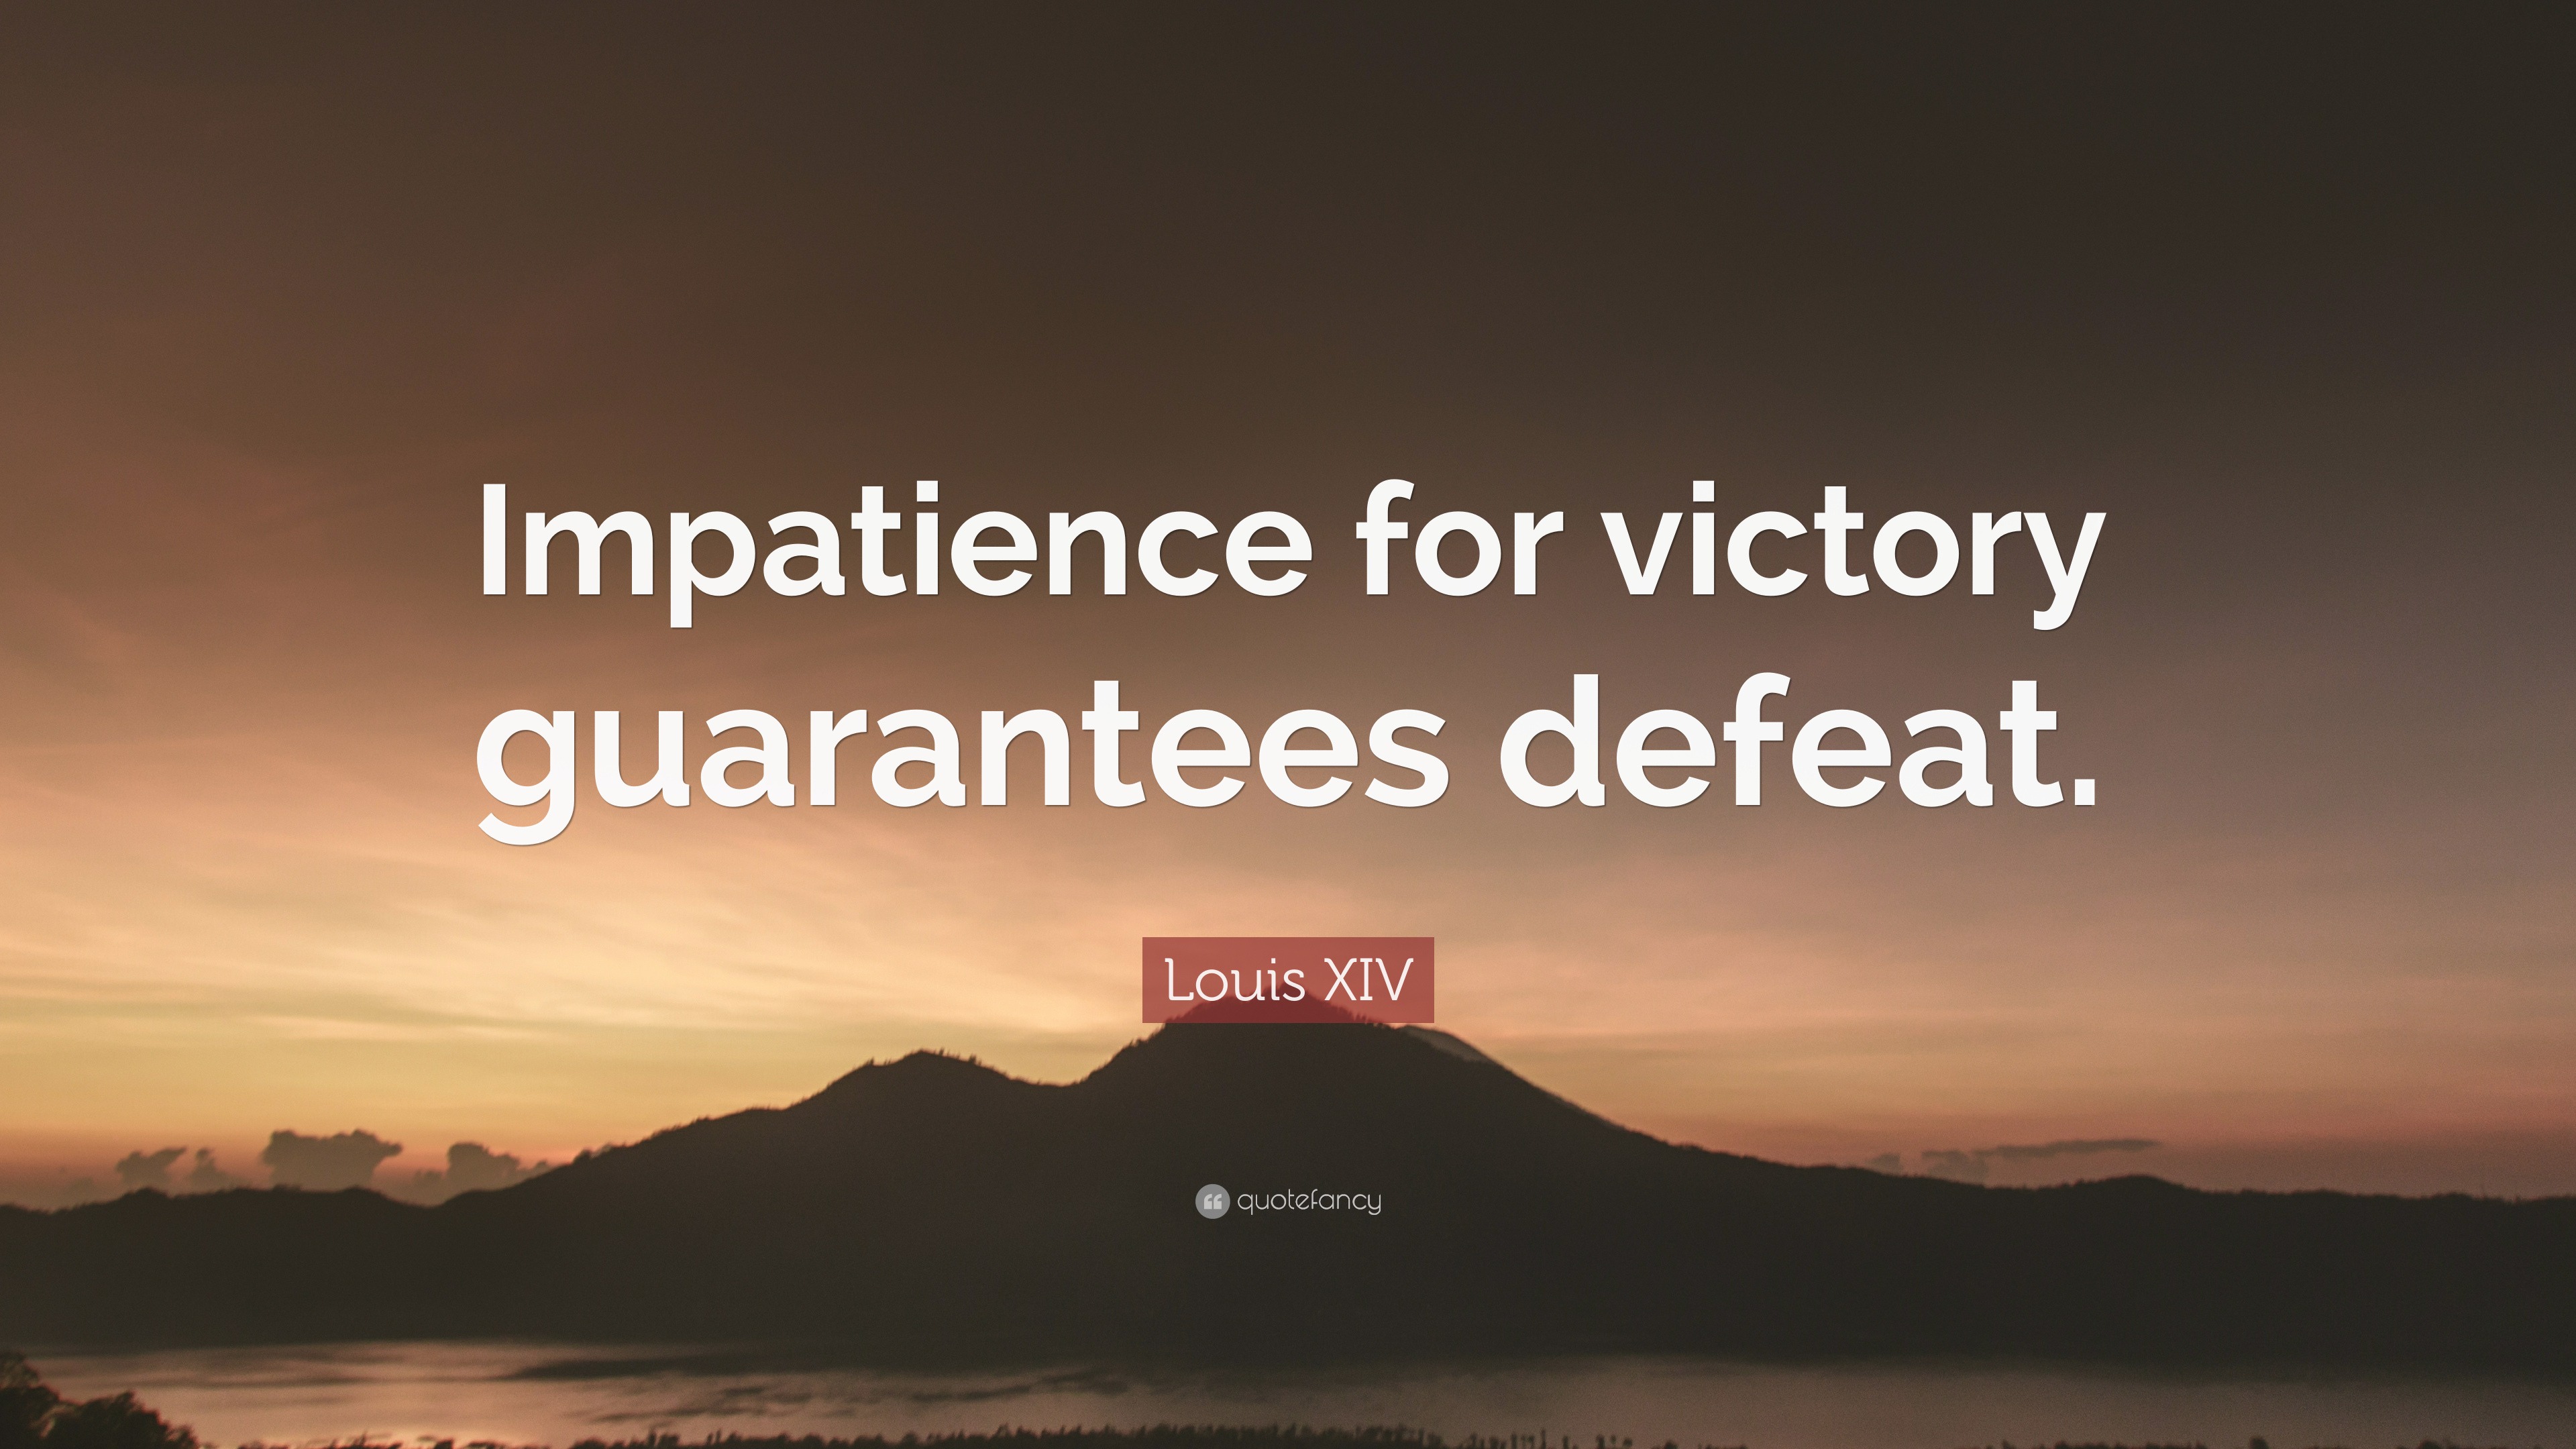 Louis XIV Quote “Impatience for victory guarantees defeat.”